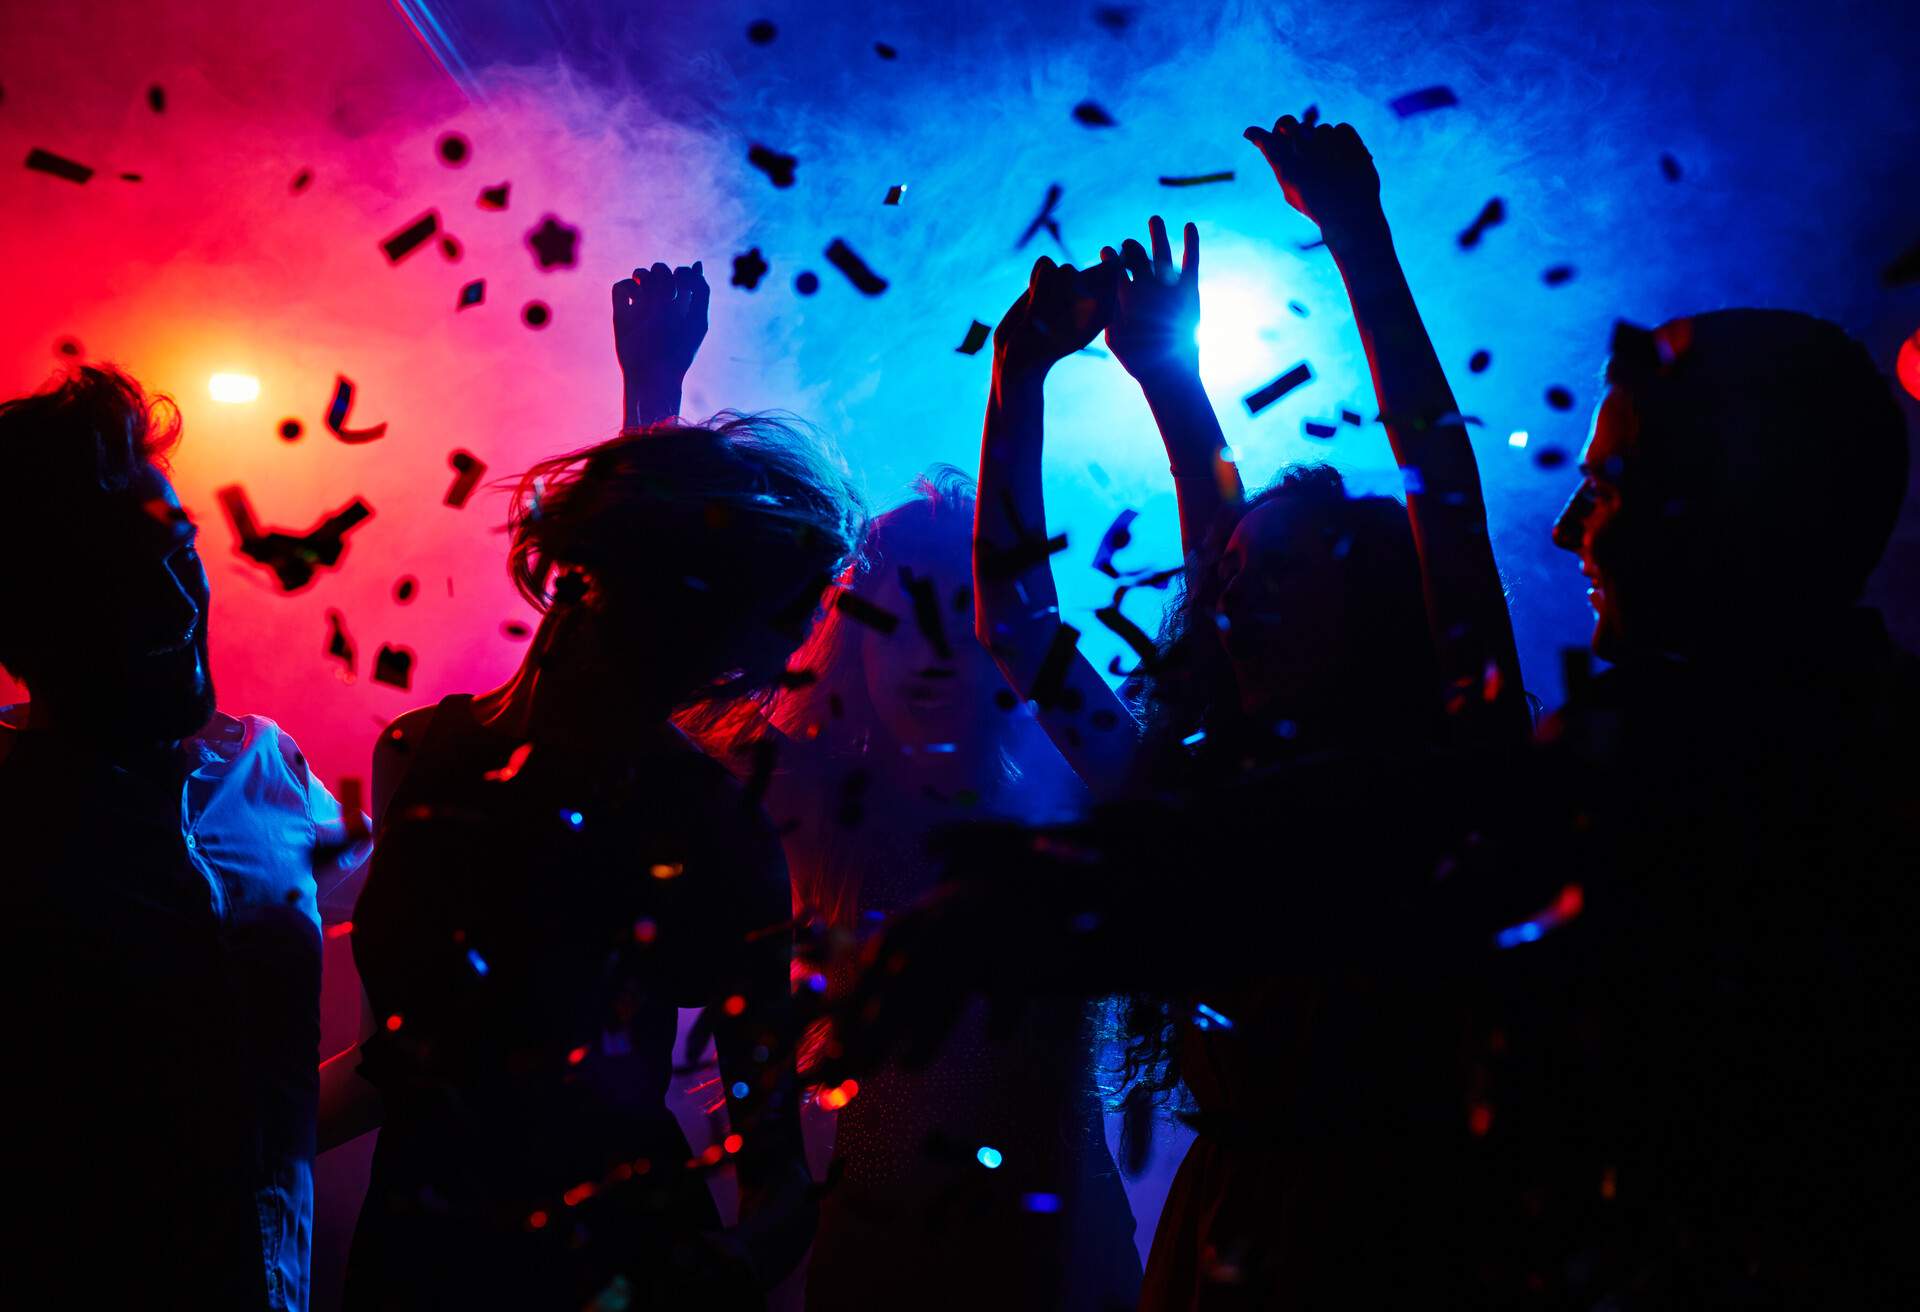 Silhouettes of dancers moving in confetti